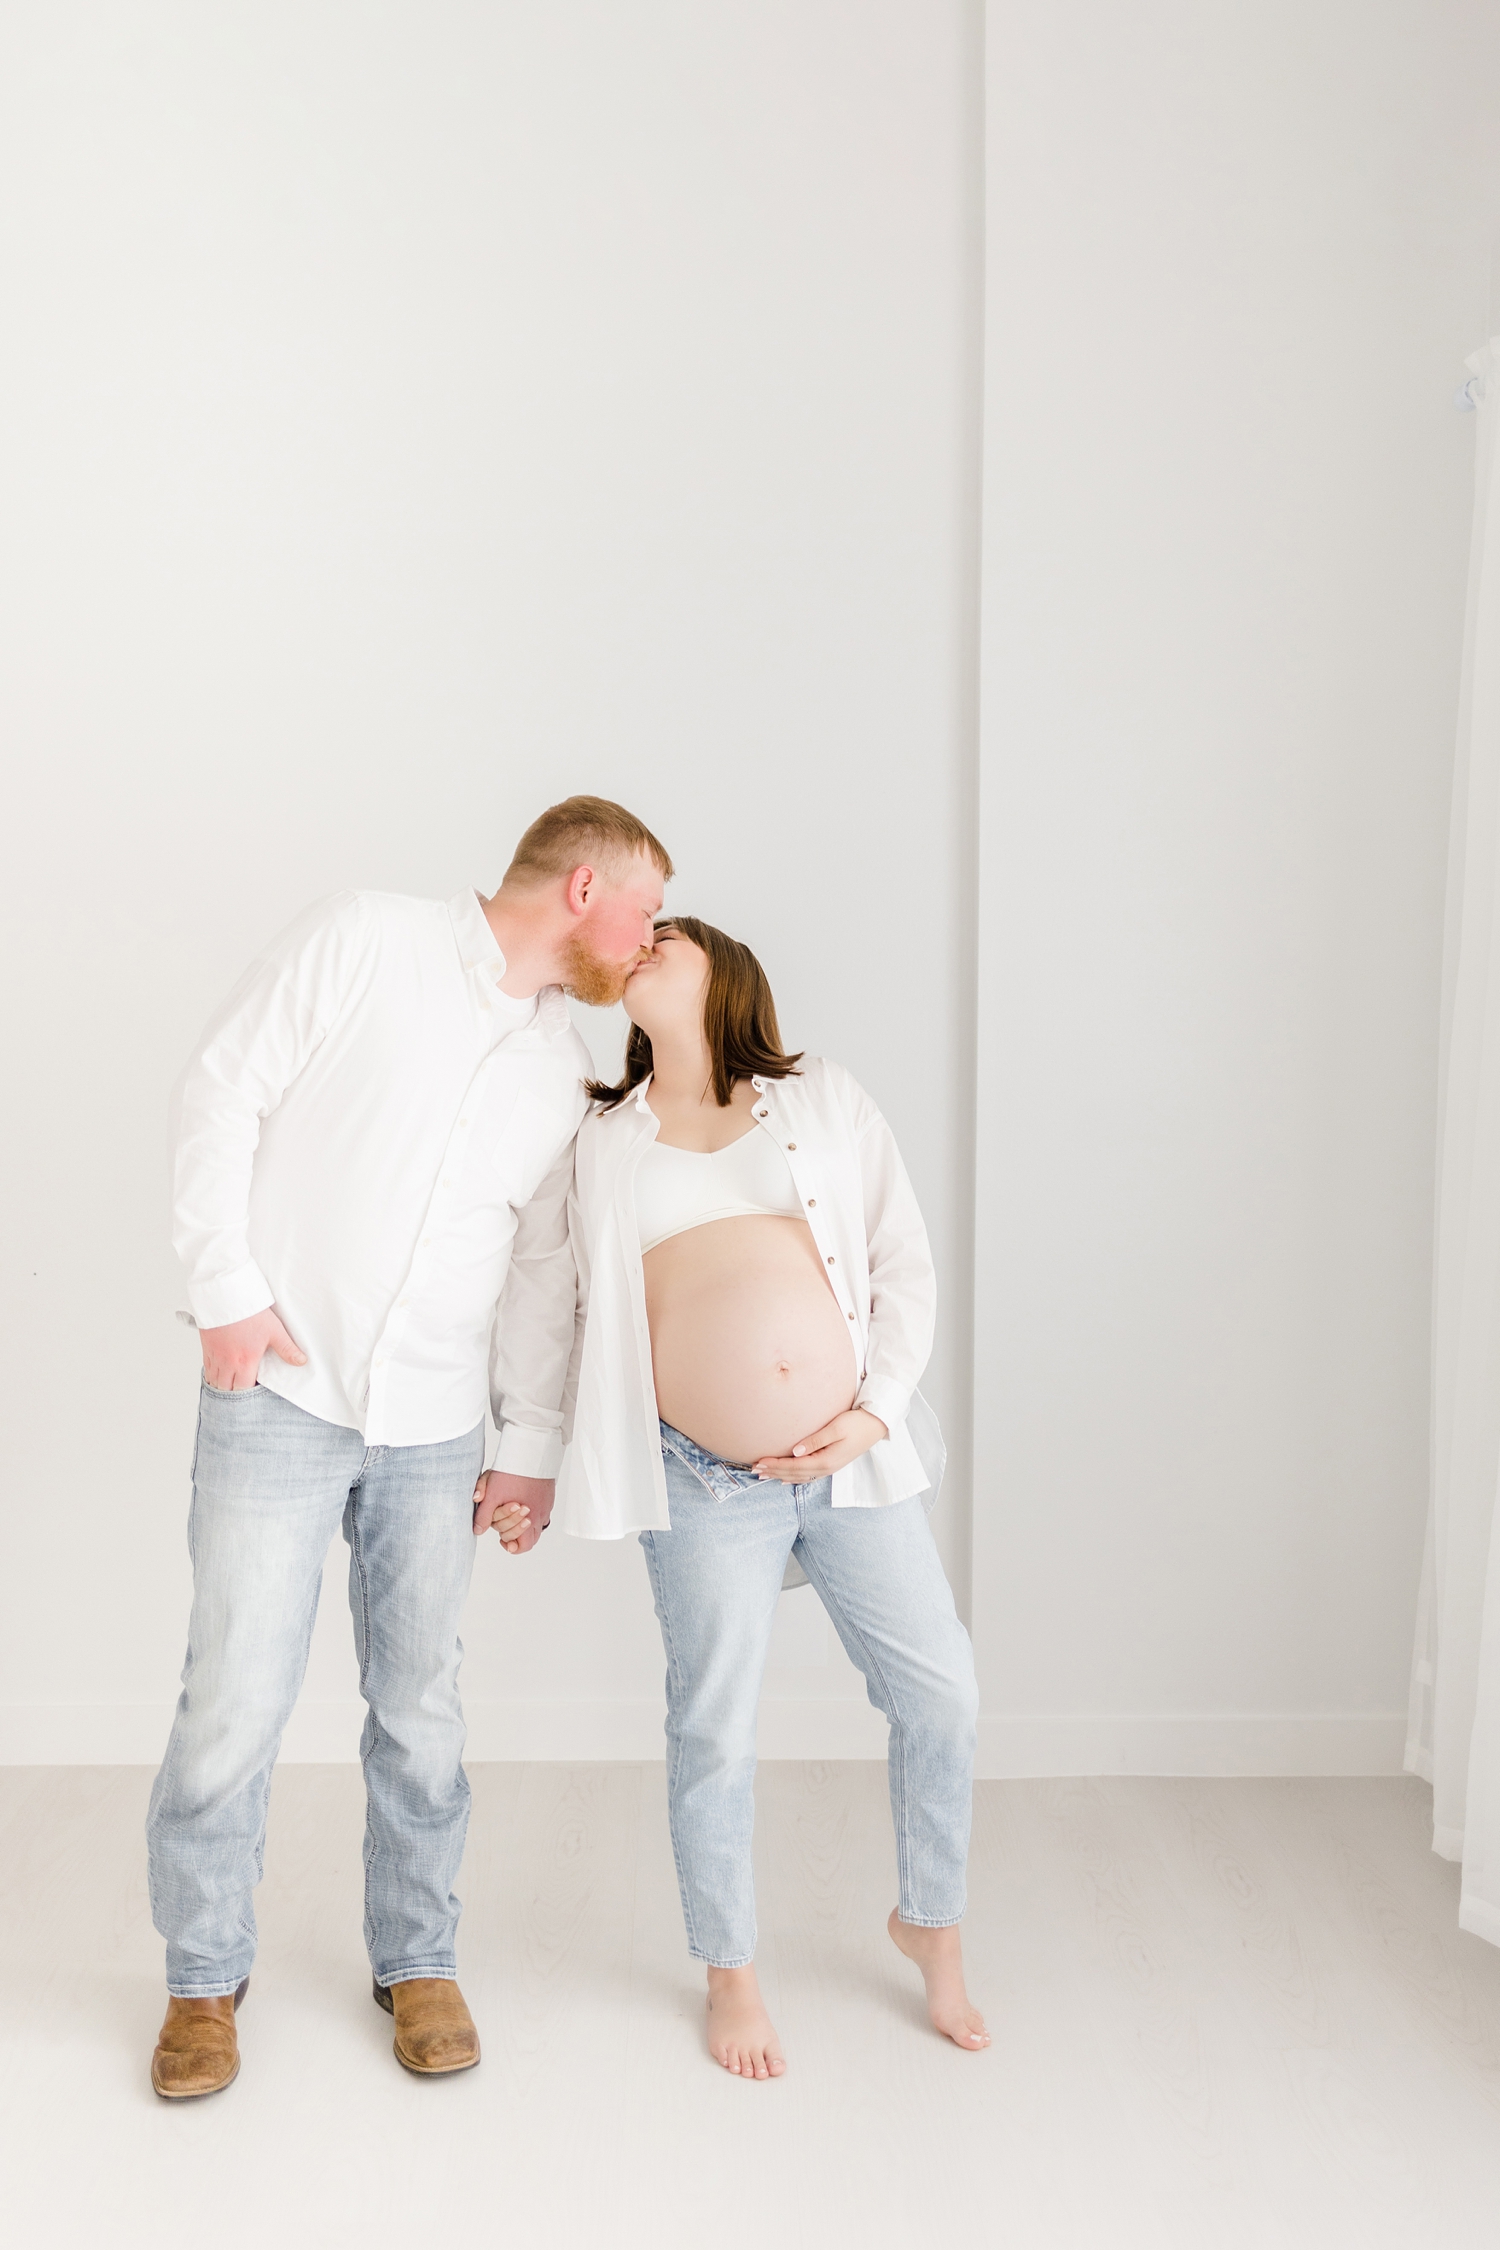 Madeline and Jeremiah lean towards each other to share a kiss while holding Madeline's baby belly | CB Studio Photography